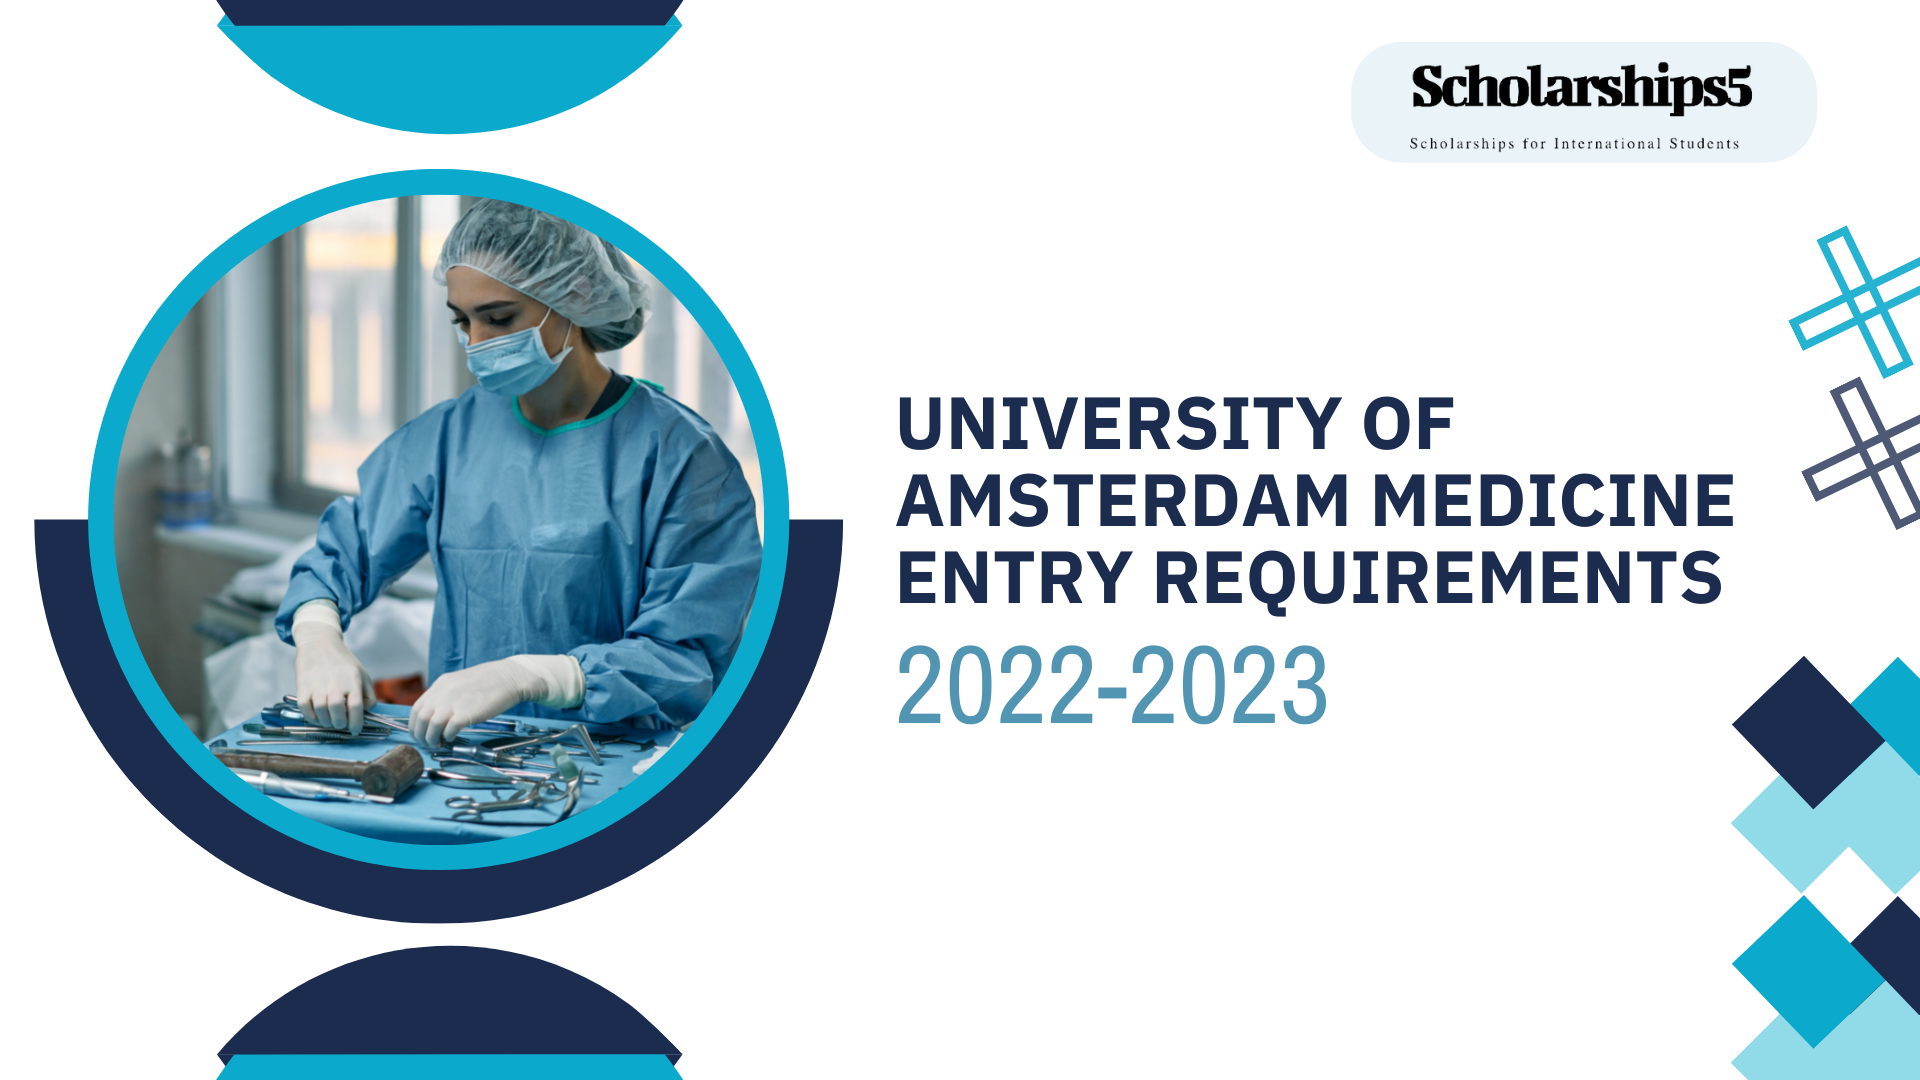 University of Amsterdam Medicine Entry Requirements 2022-2023